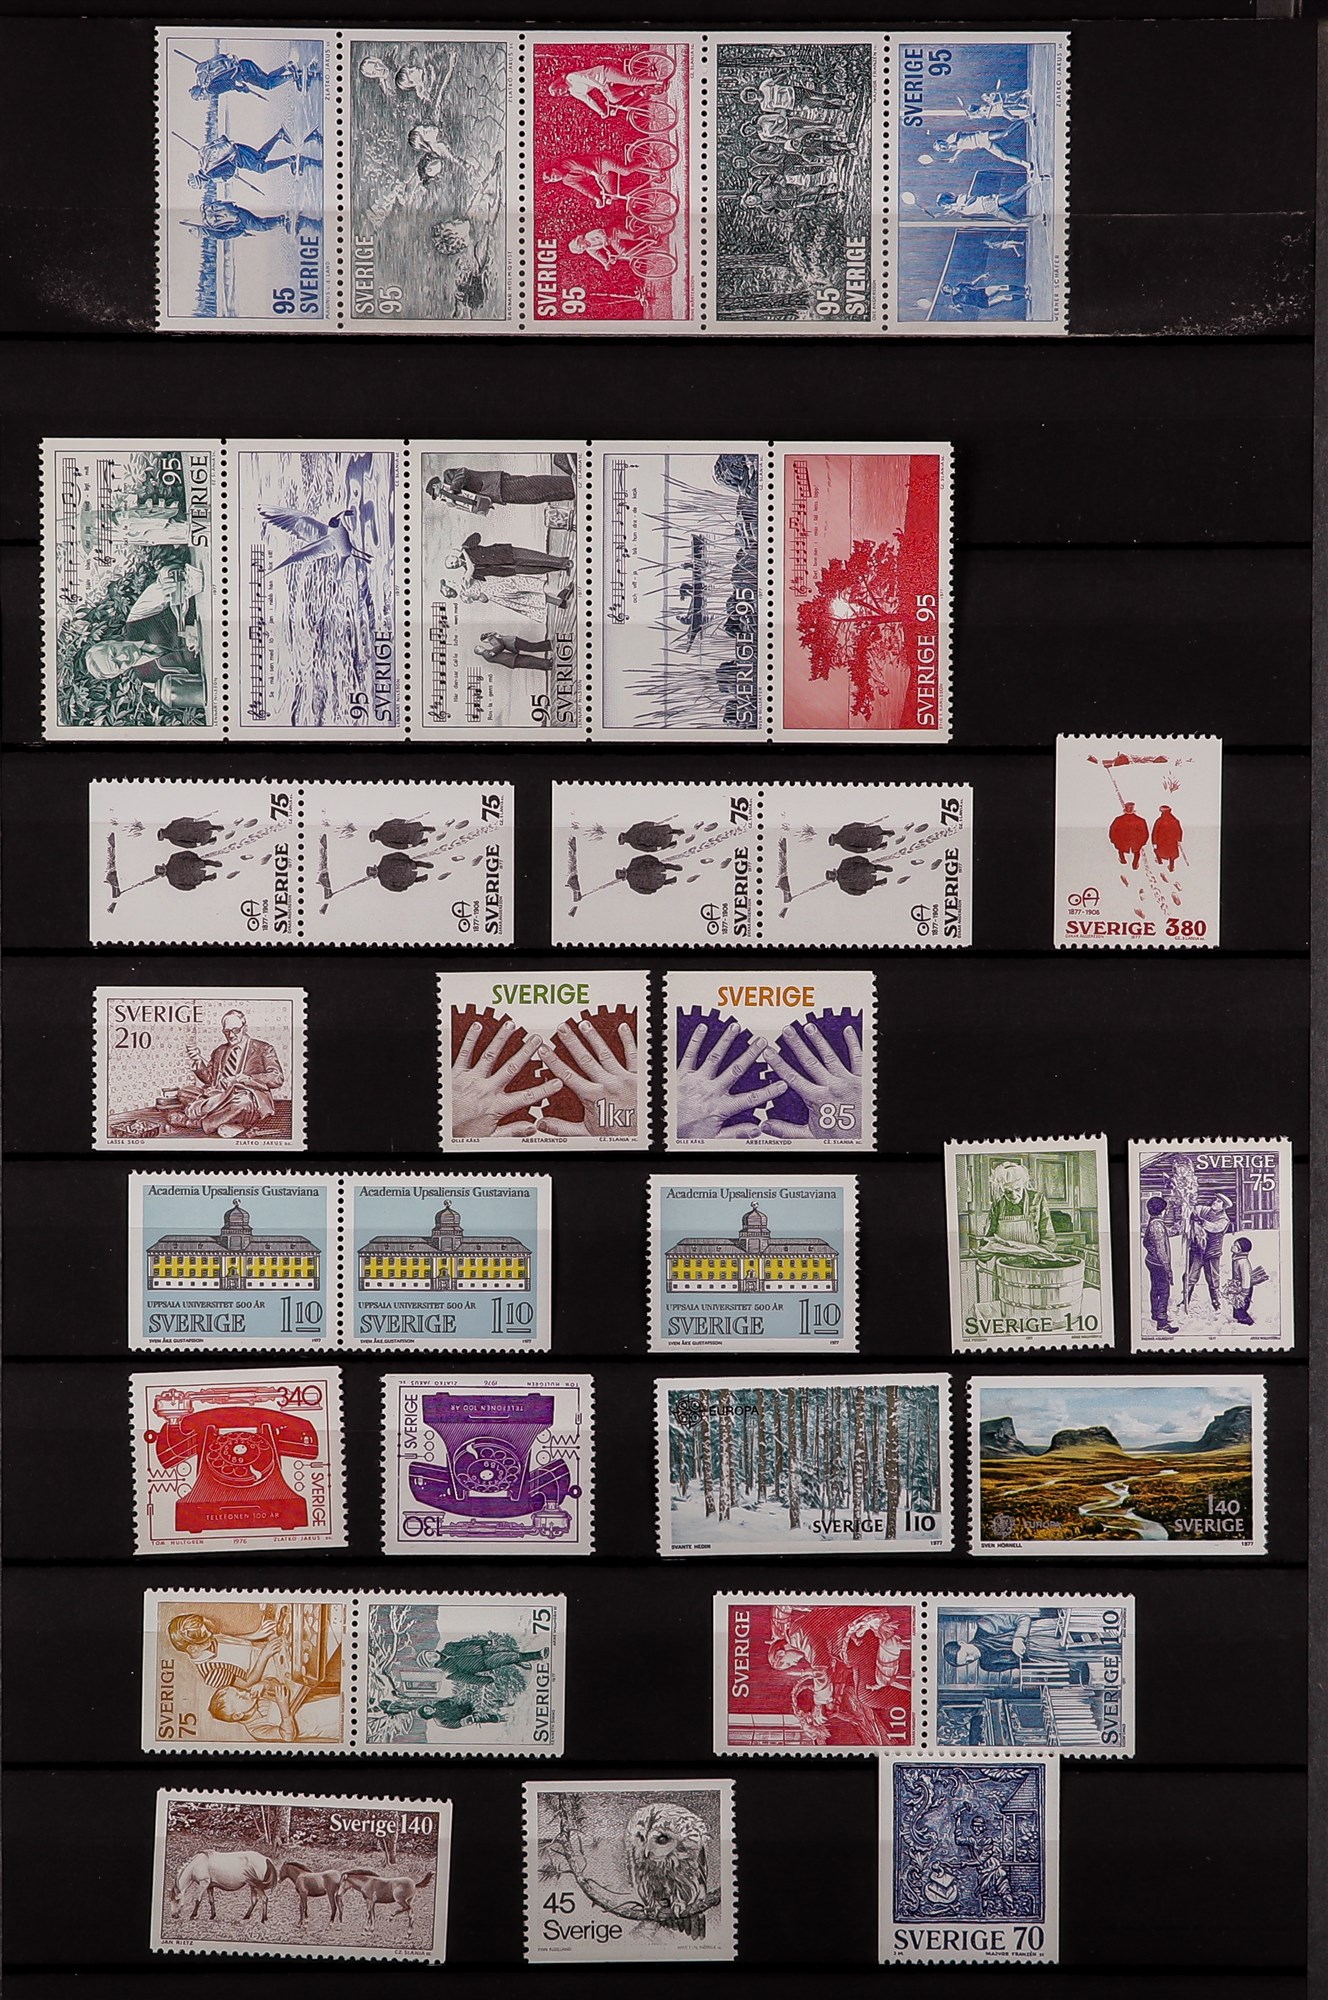 SWEDEN 1957-81 NEVER HINGED MINT COLLECTION with various perforation types, se-tenant issues, 1981 - Image 6 of 6